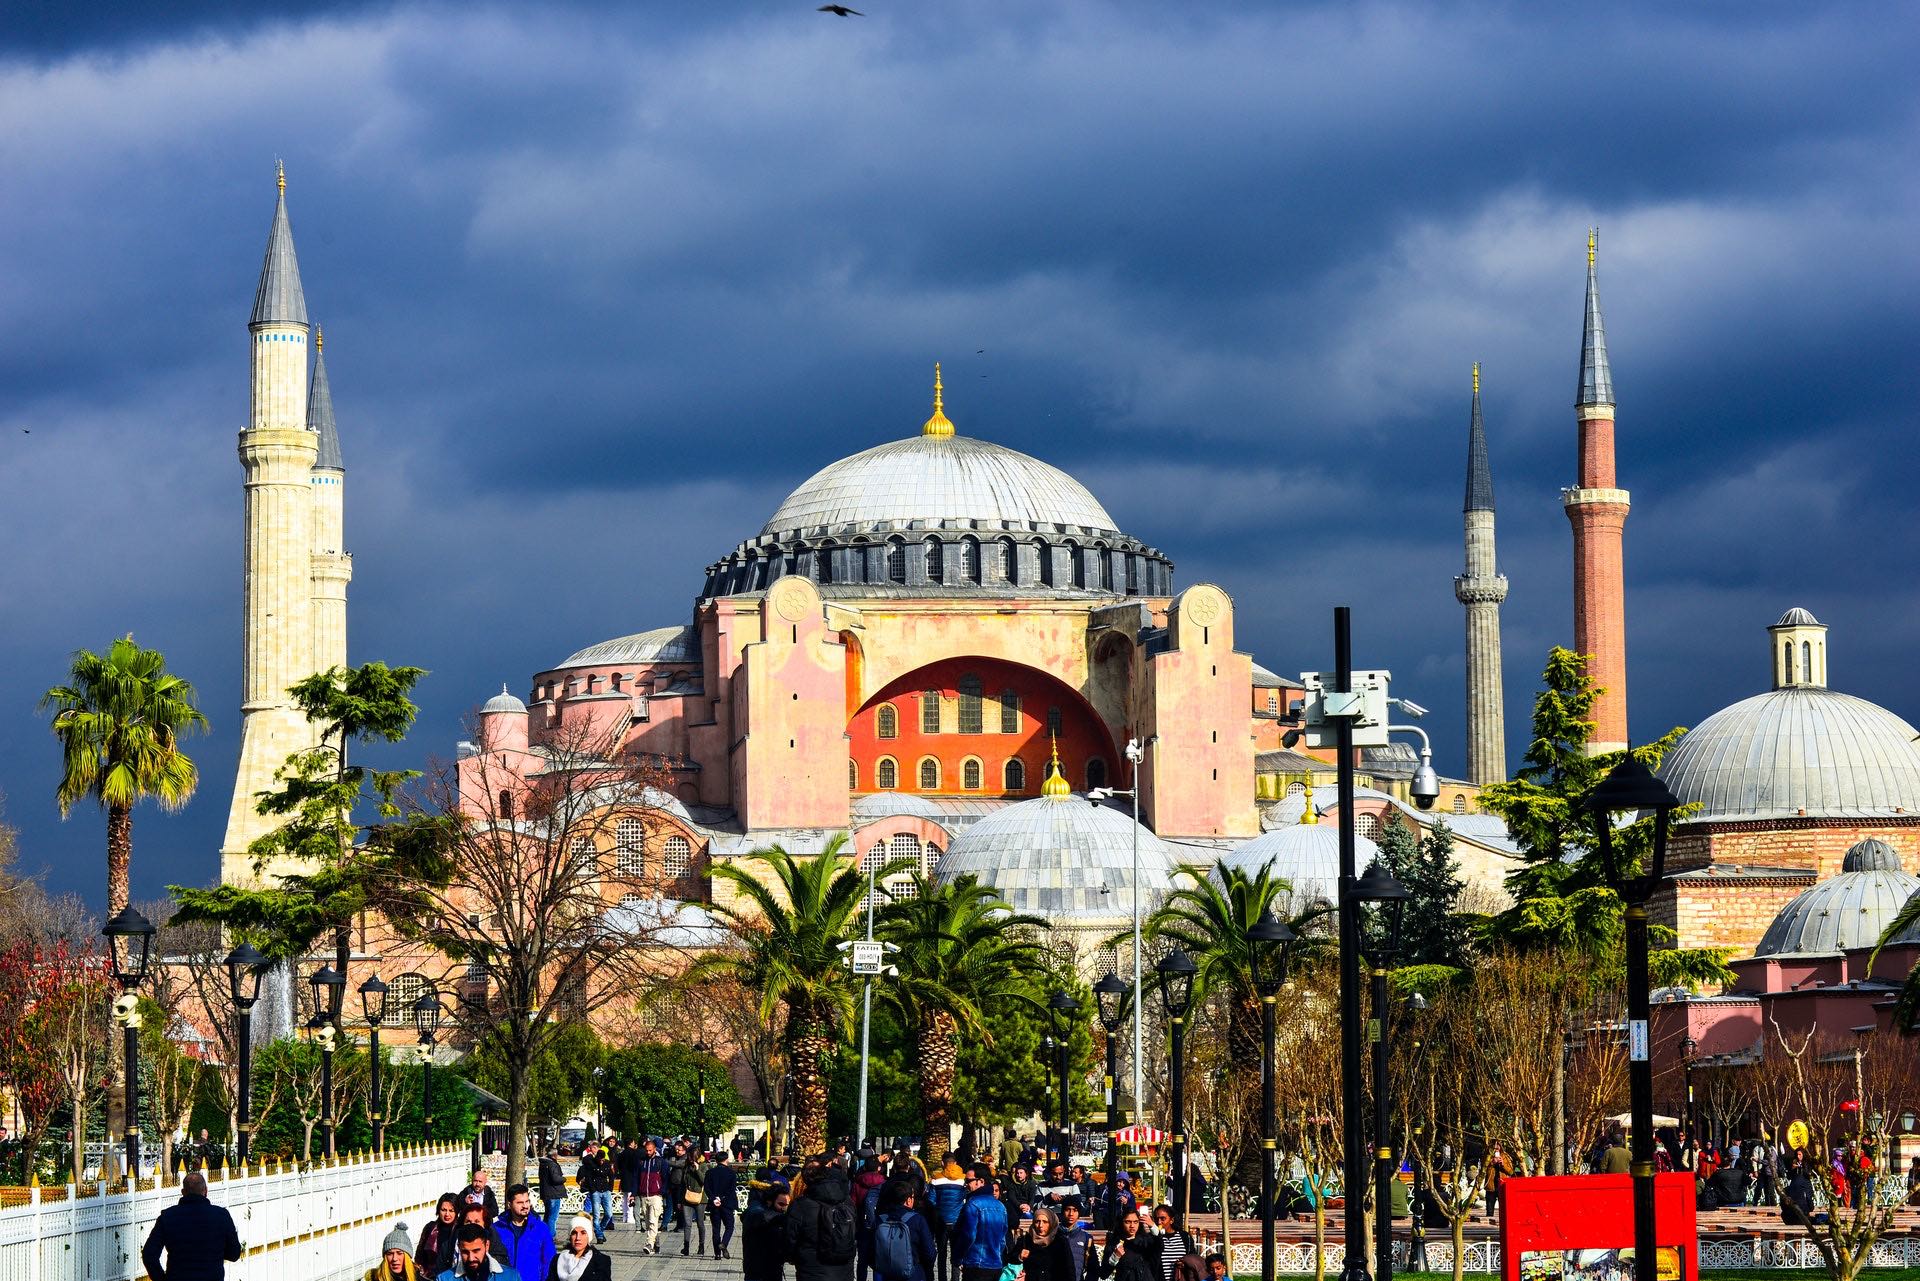 a group of people walking in front of a large building with Hagia Sophia in the background